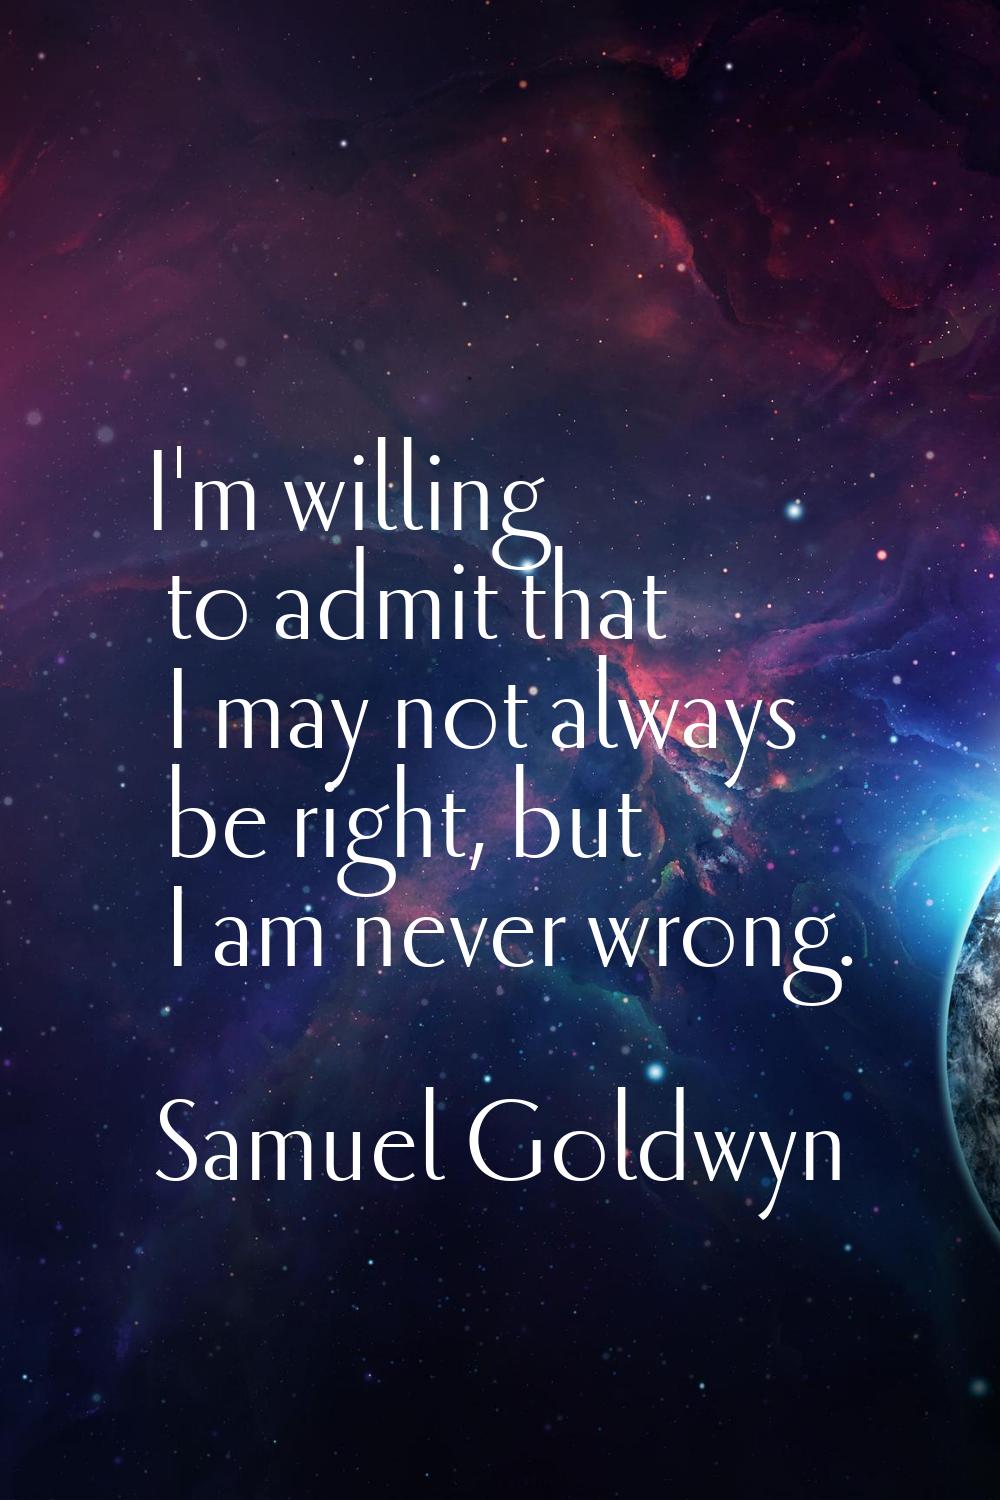 I'm willing to admit that I may not always be right, but I am never wrong.